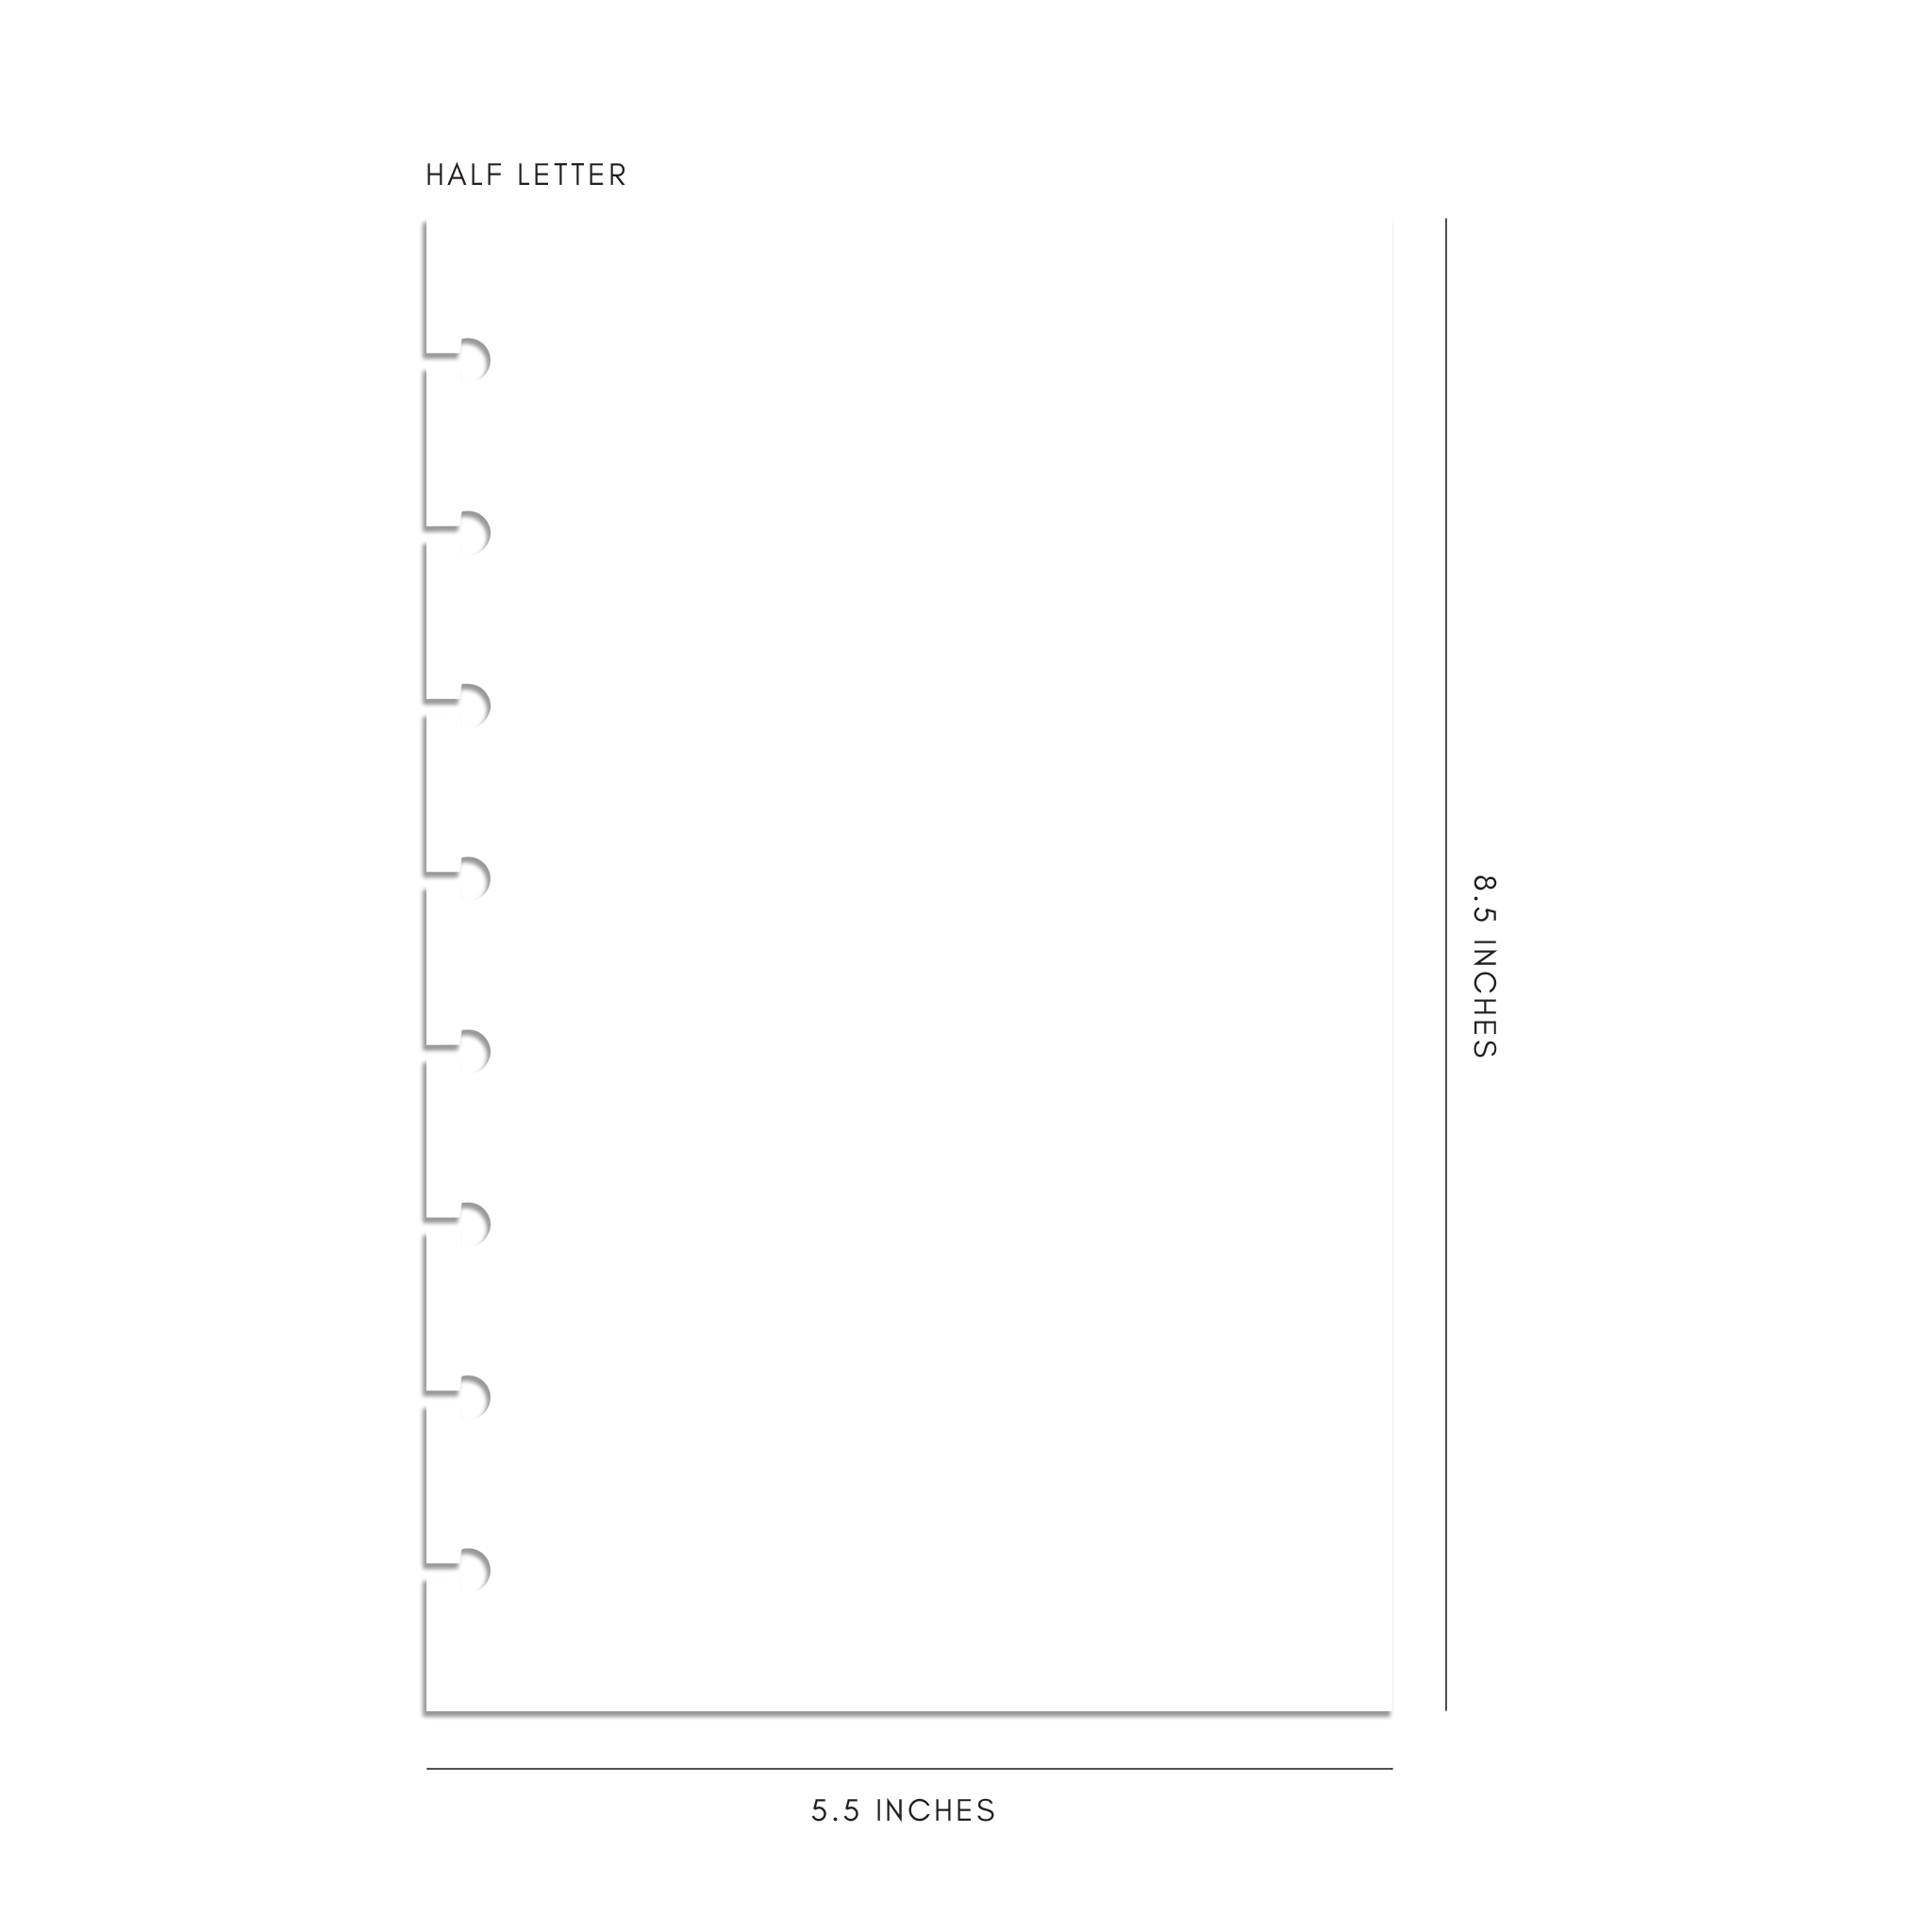 4x6 Just Date Dividers, Index Card Dividers Printable for Planning